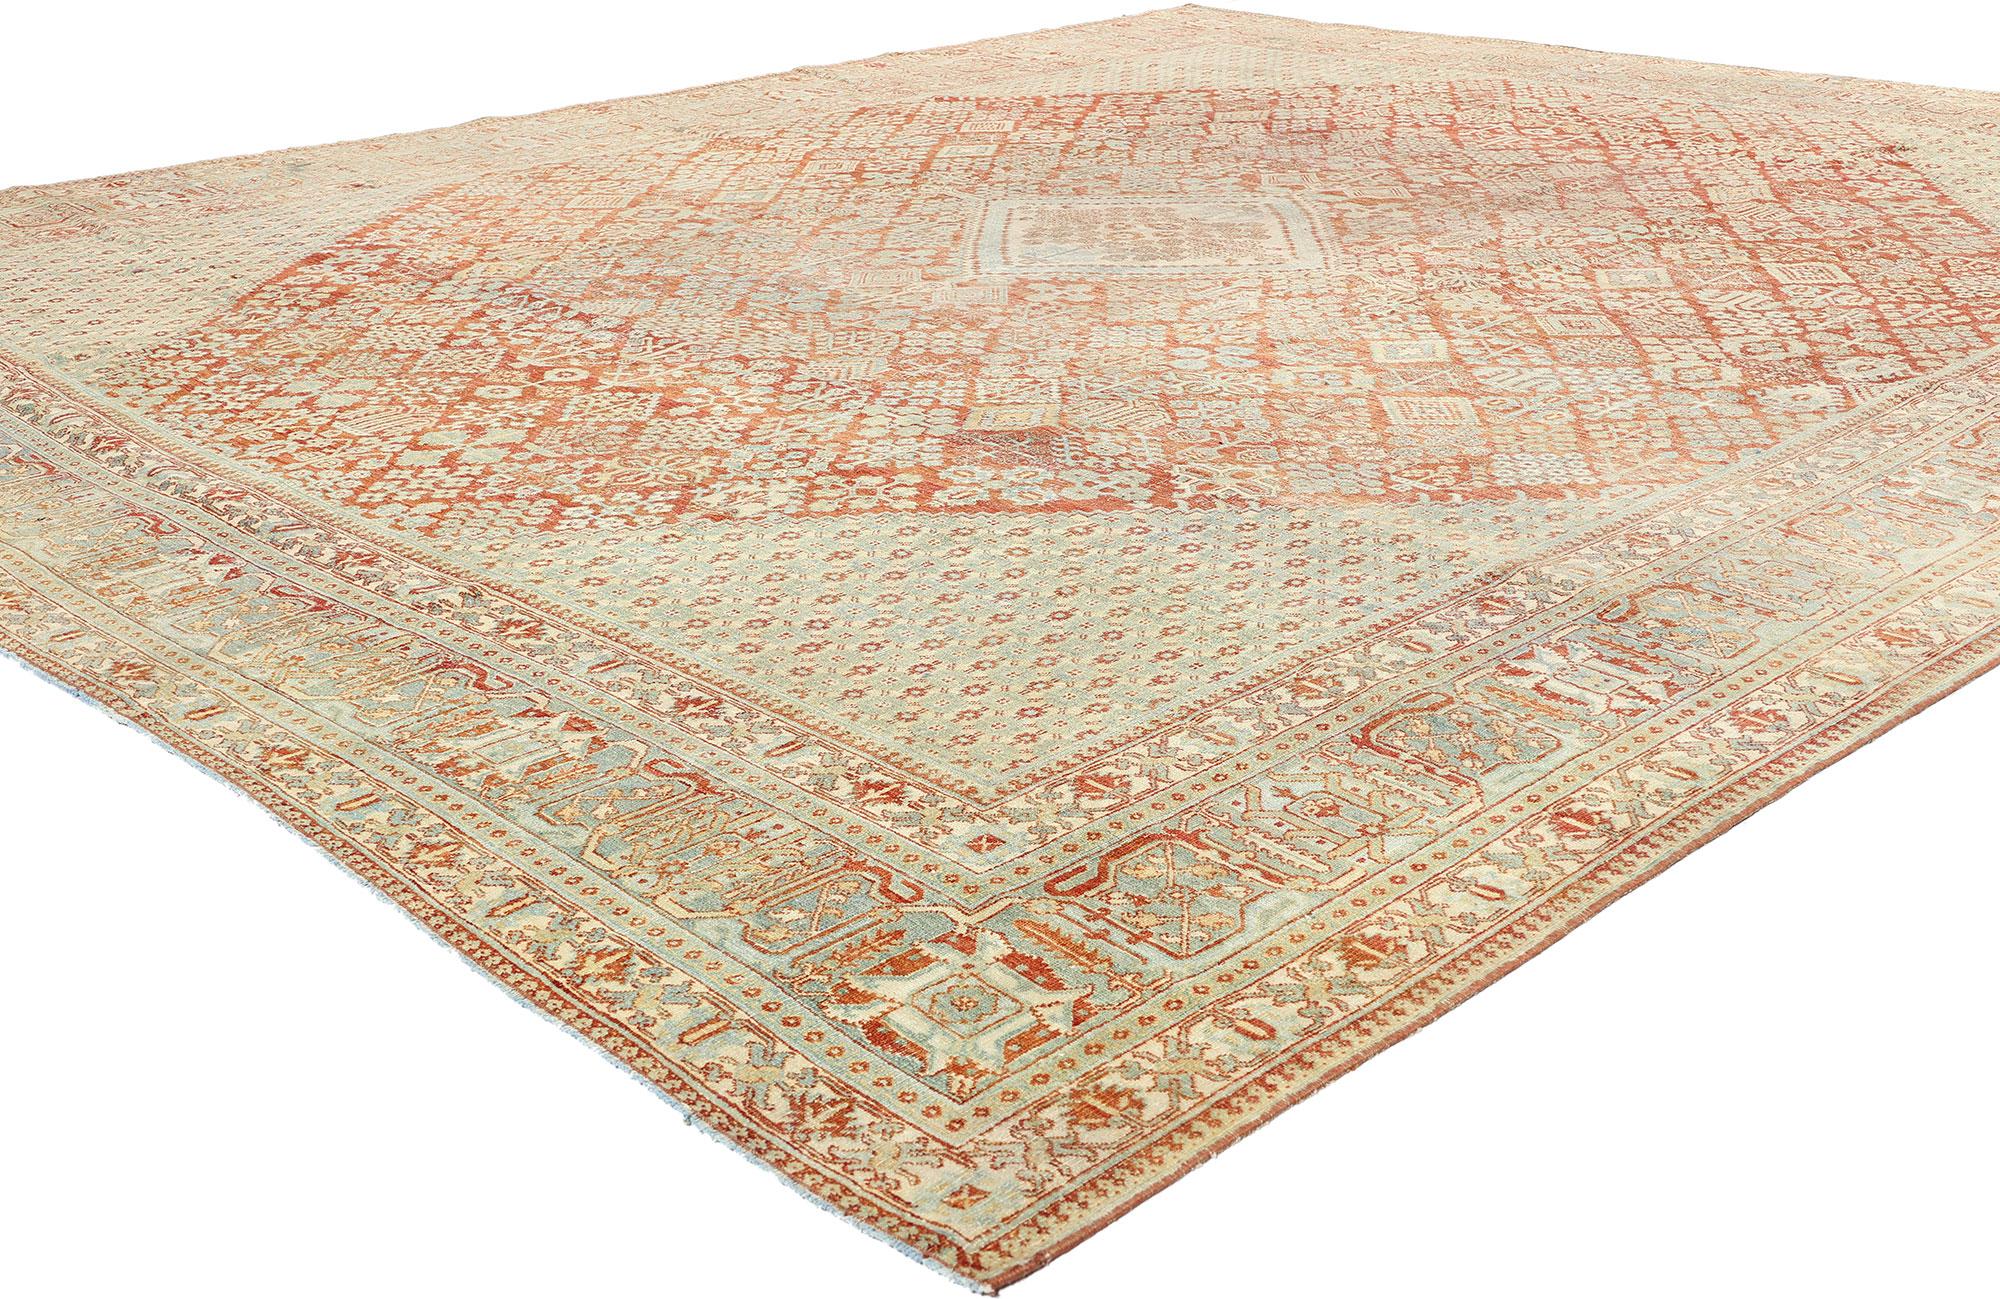 52558 Antique Persian Joshegan Rug, 10'11 x 12'10. Antique-washed Persian Joshegan rugs refer to rugs that have undergone a washing process to give them an aged or antique appearance. This washing process involves  softening the colors and creating